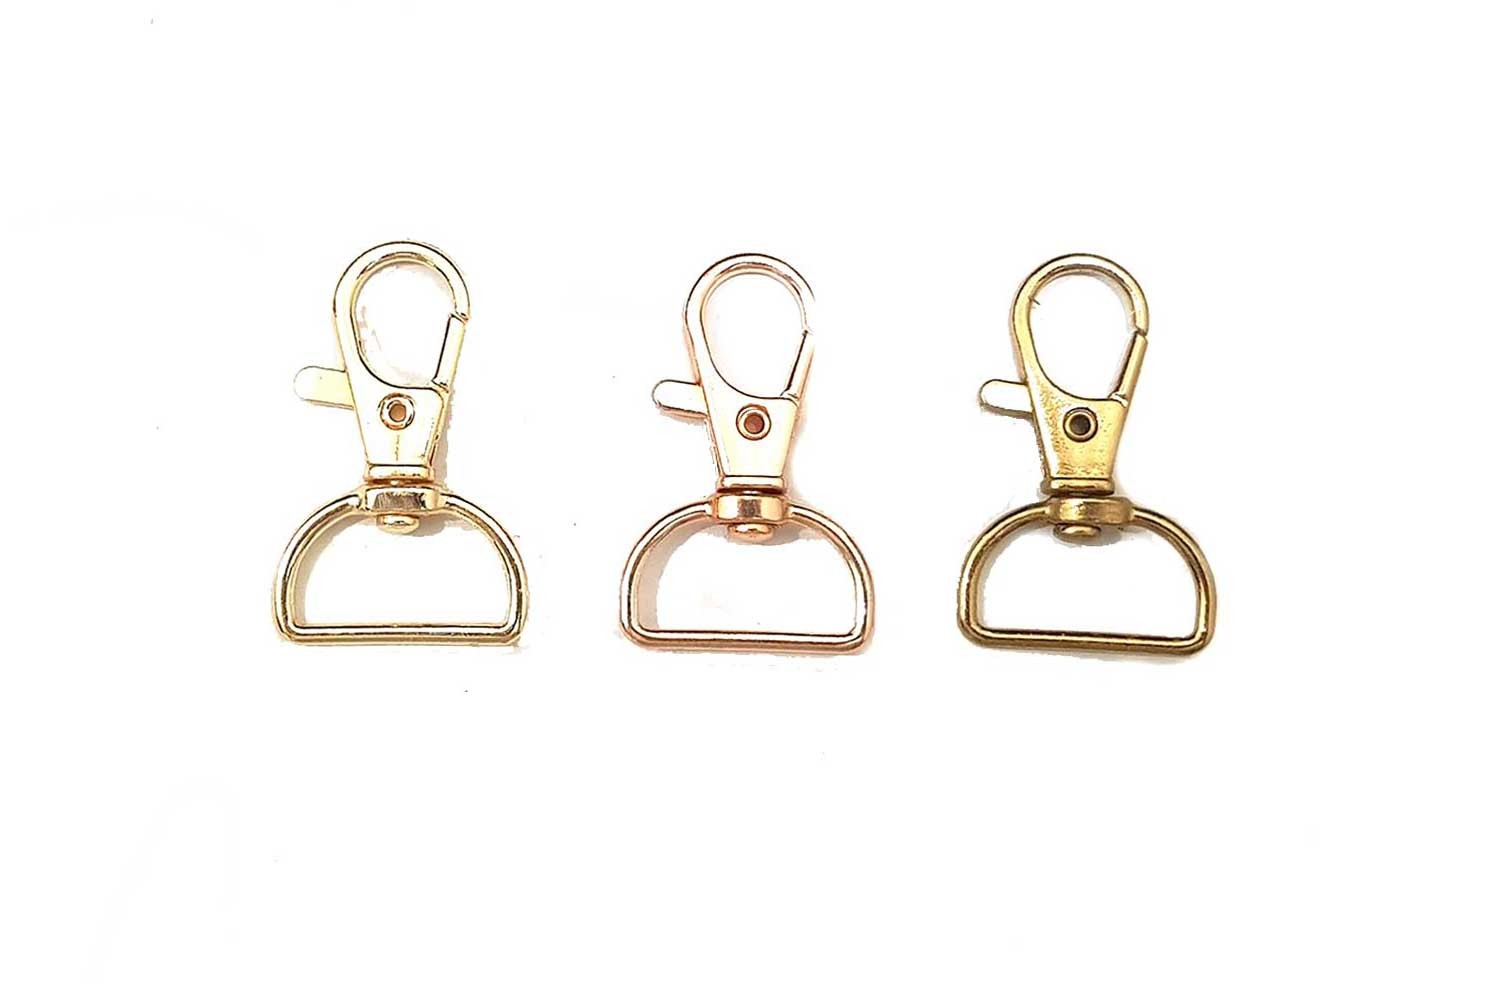 Rose Gold Lobster Clasp Swivel Hooks with D Rings webbing bag strap  hardware connector, Carabiner hook for bags, keychains etc.